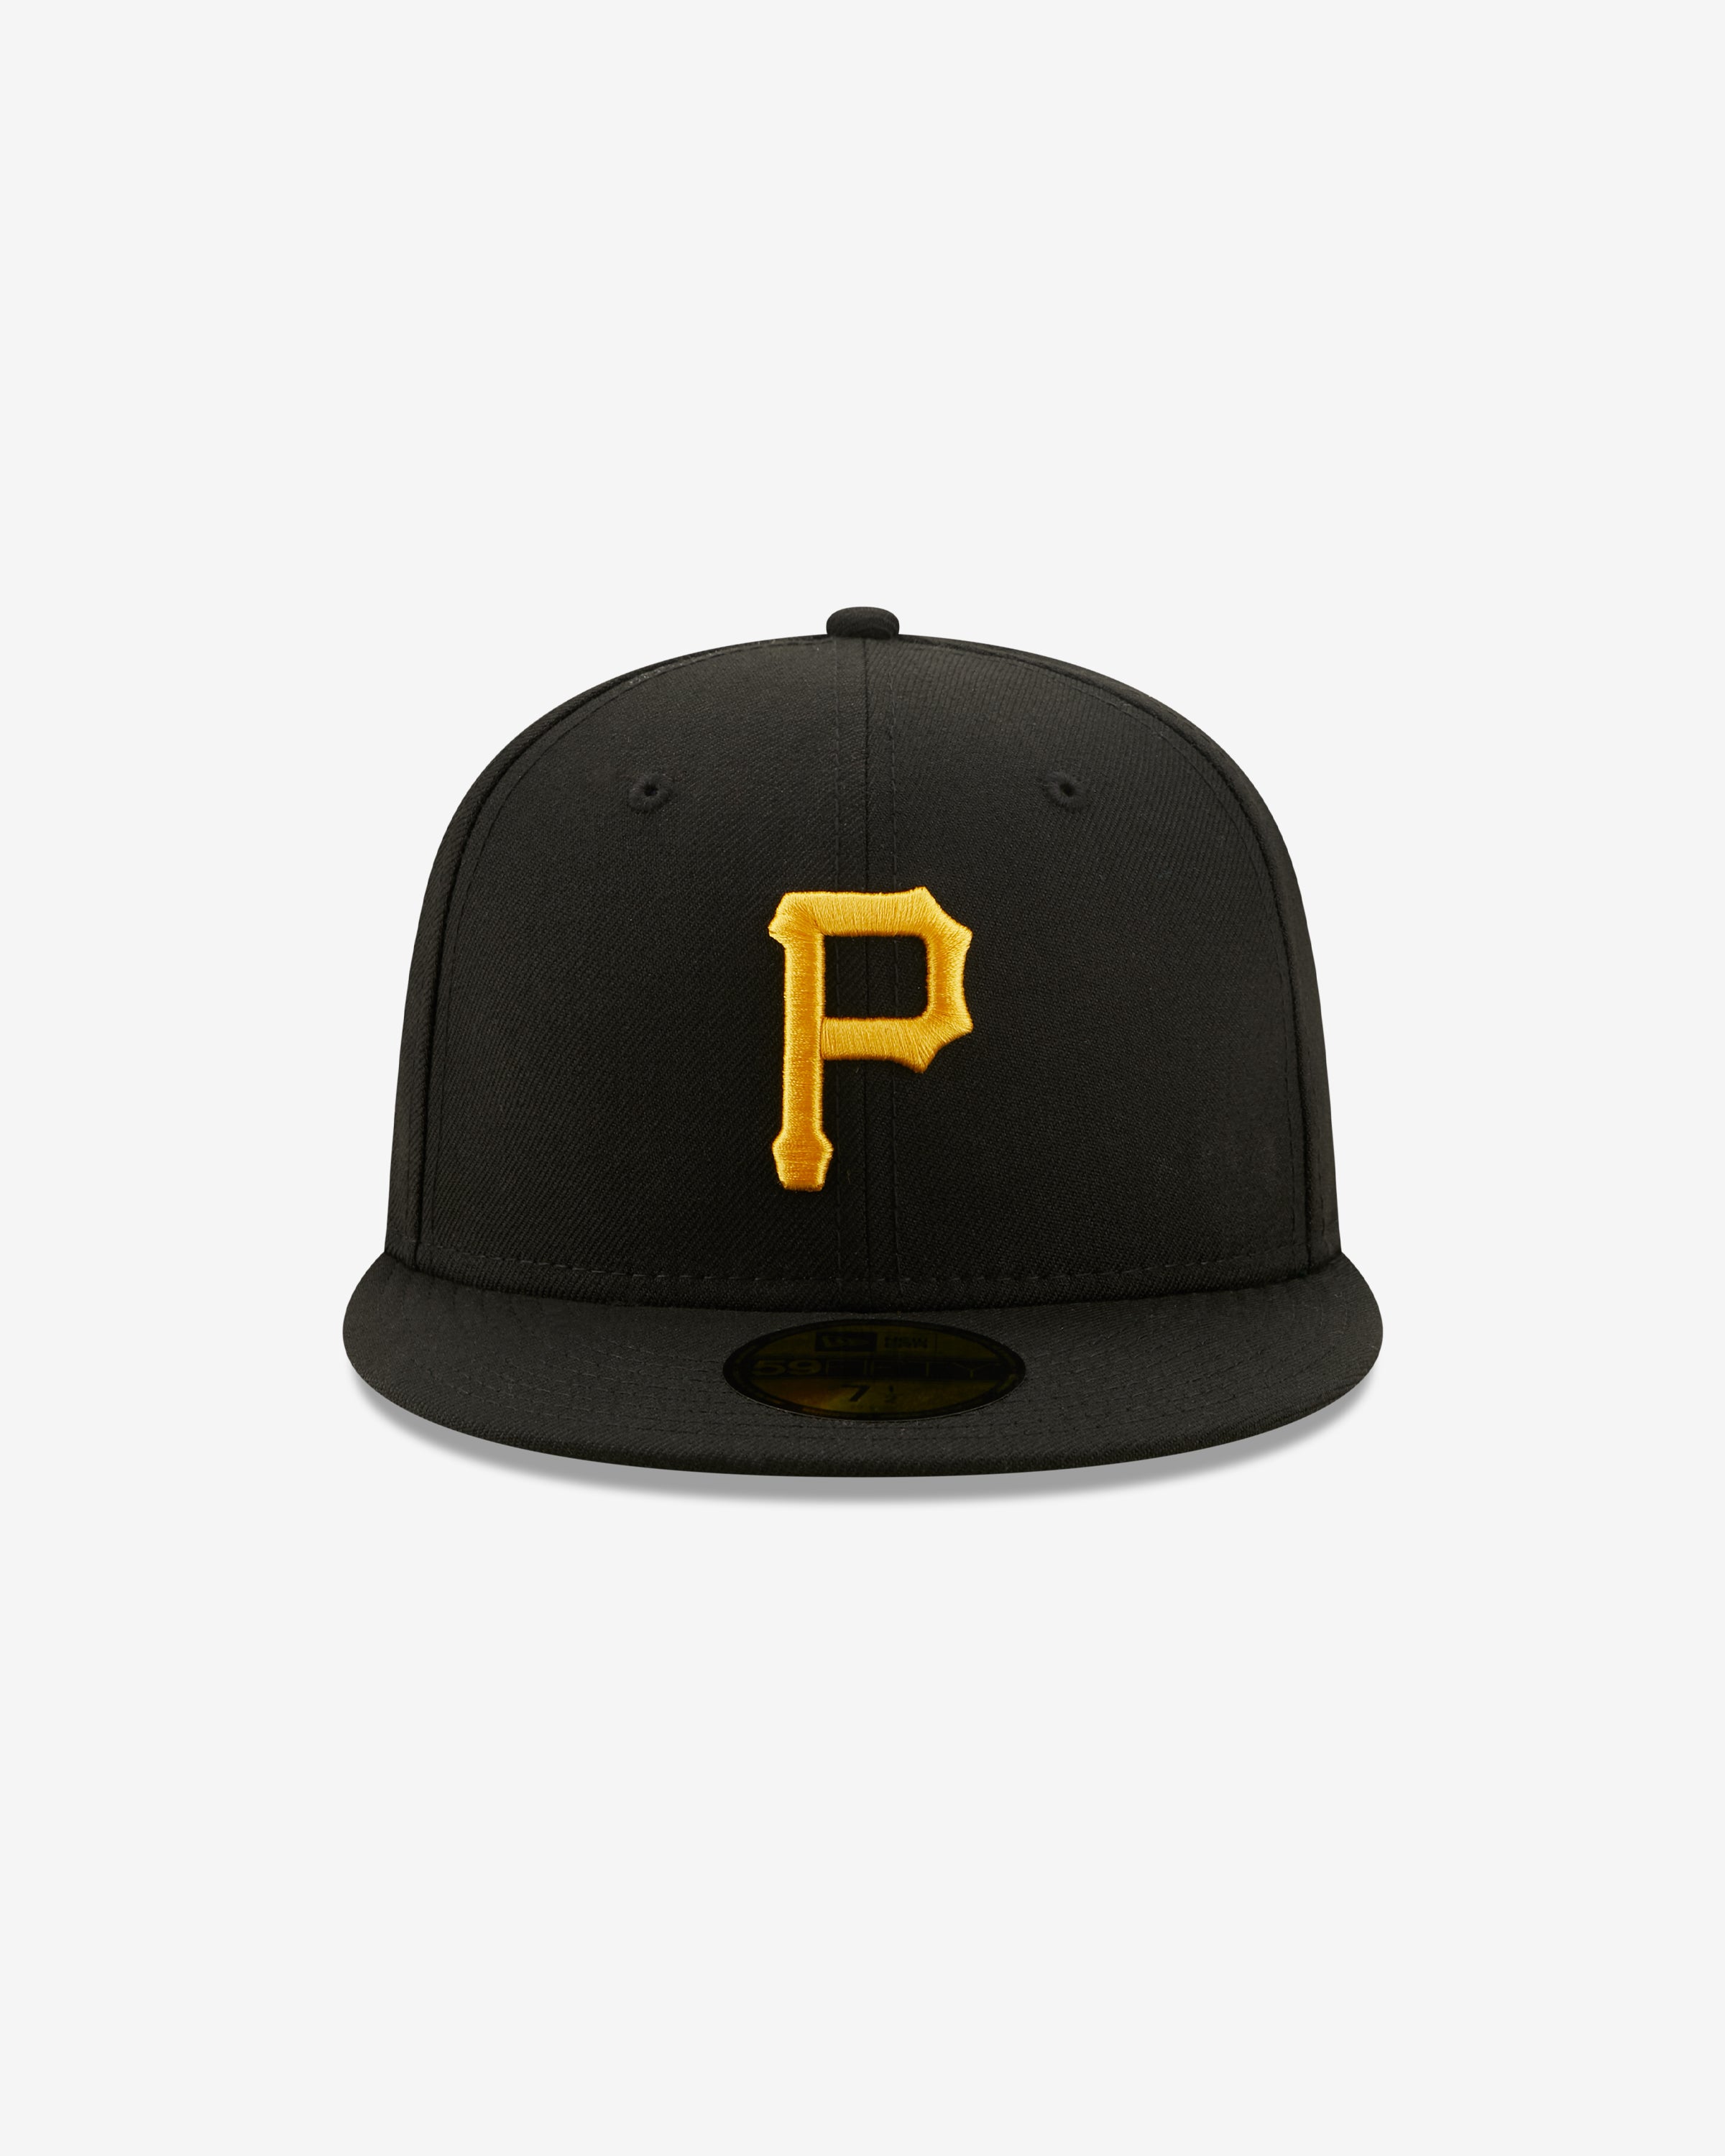 NEW ERA LOGO HISTORY 59FIFTY FITTED - PITTSBURGH PIRATES (1960)